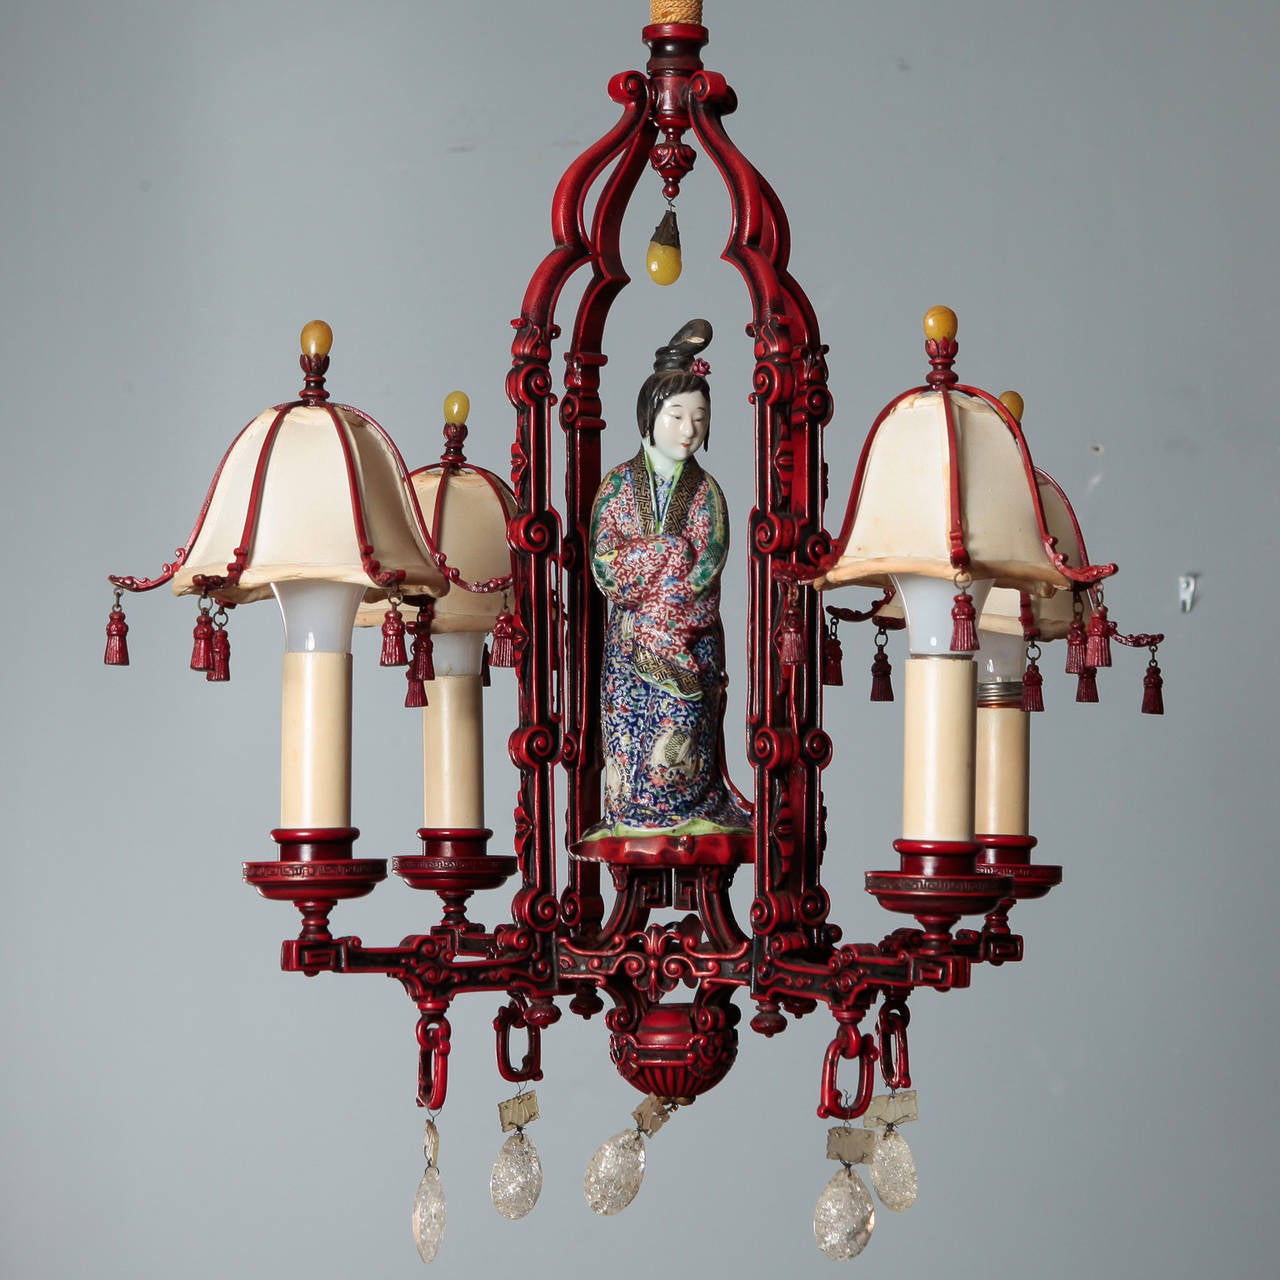 Circa 1920s Chinoserie chandelier with iron base in red painted finish with candle style lights, original silk shades with metal tassels, a central porcelain figure and rock crystal pendants. Updated wiring. Sconces in this style also available.